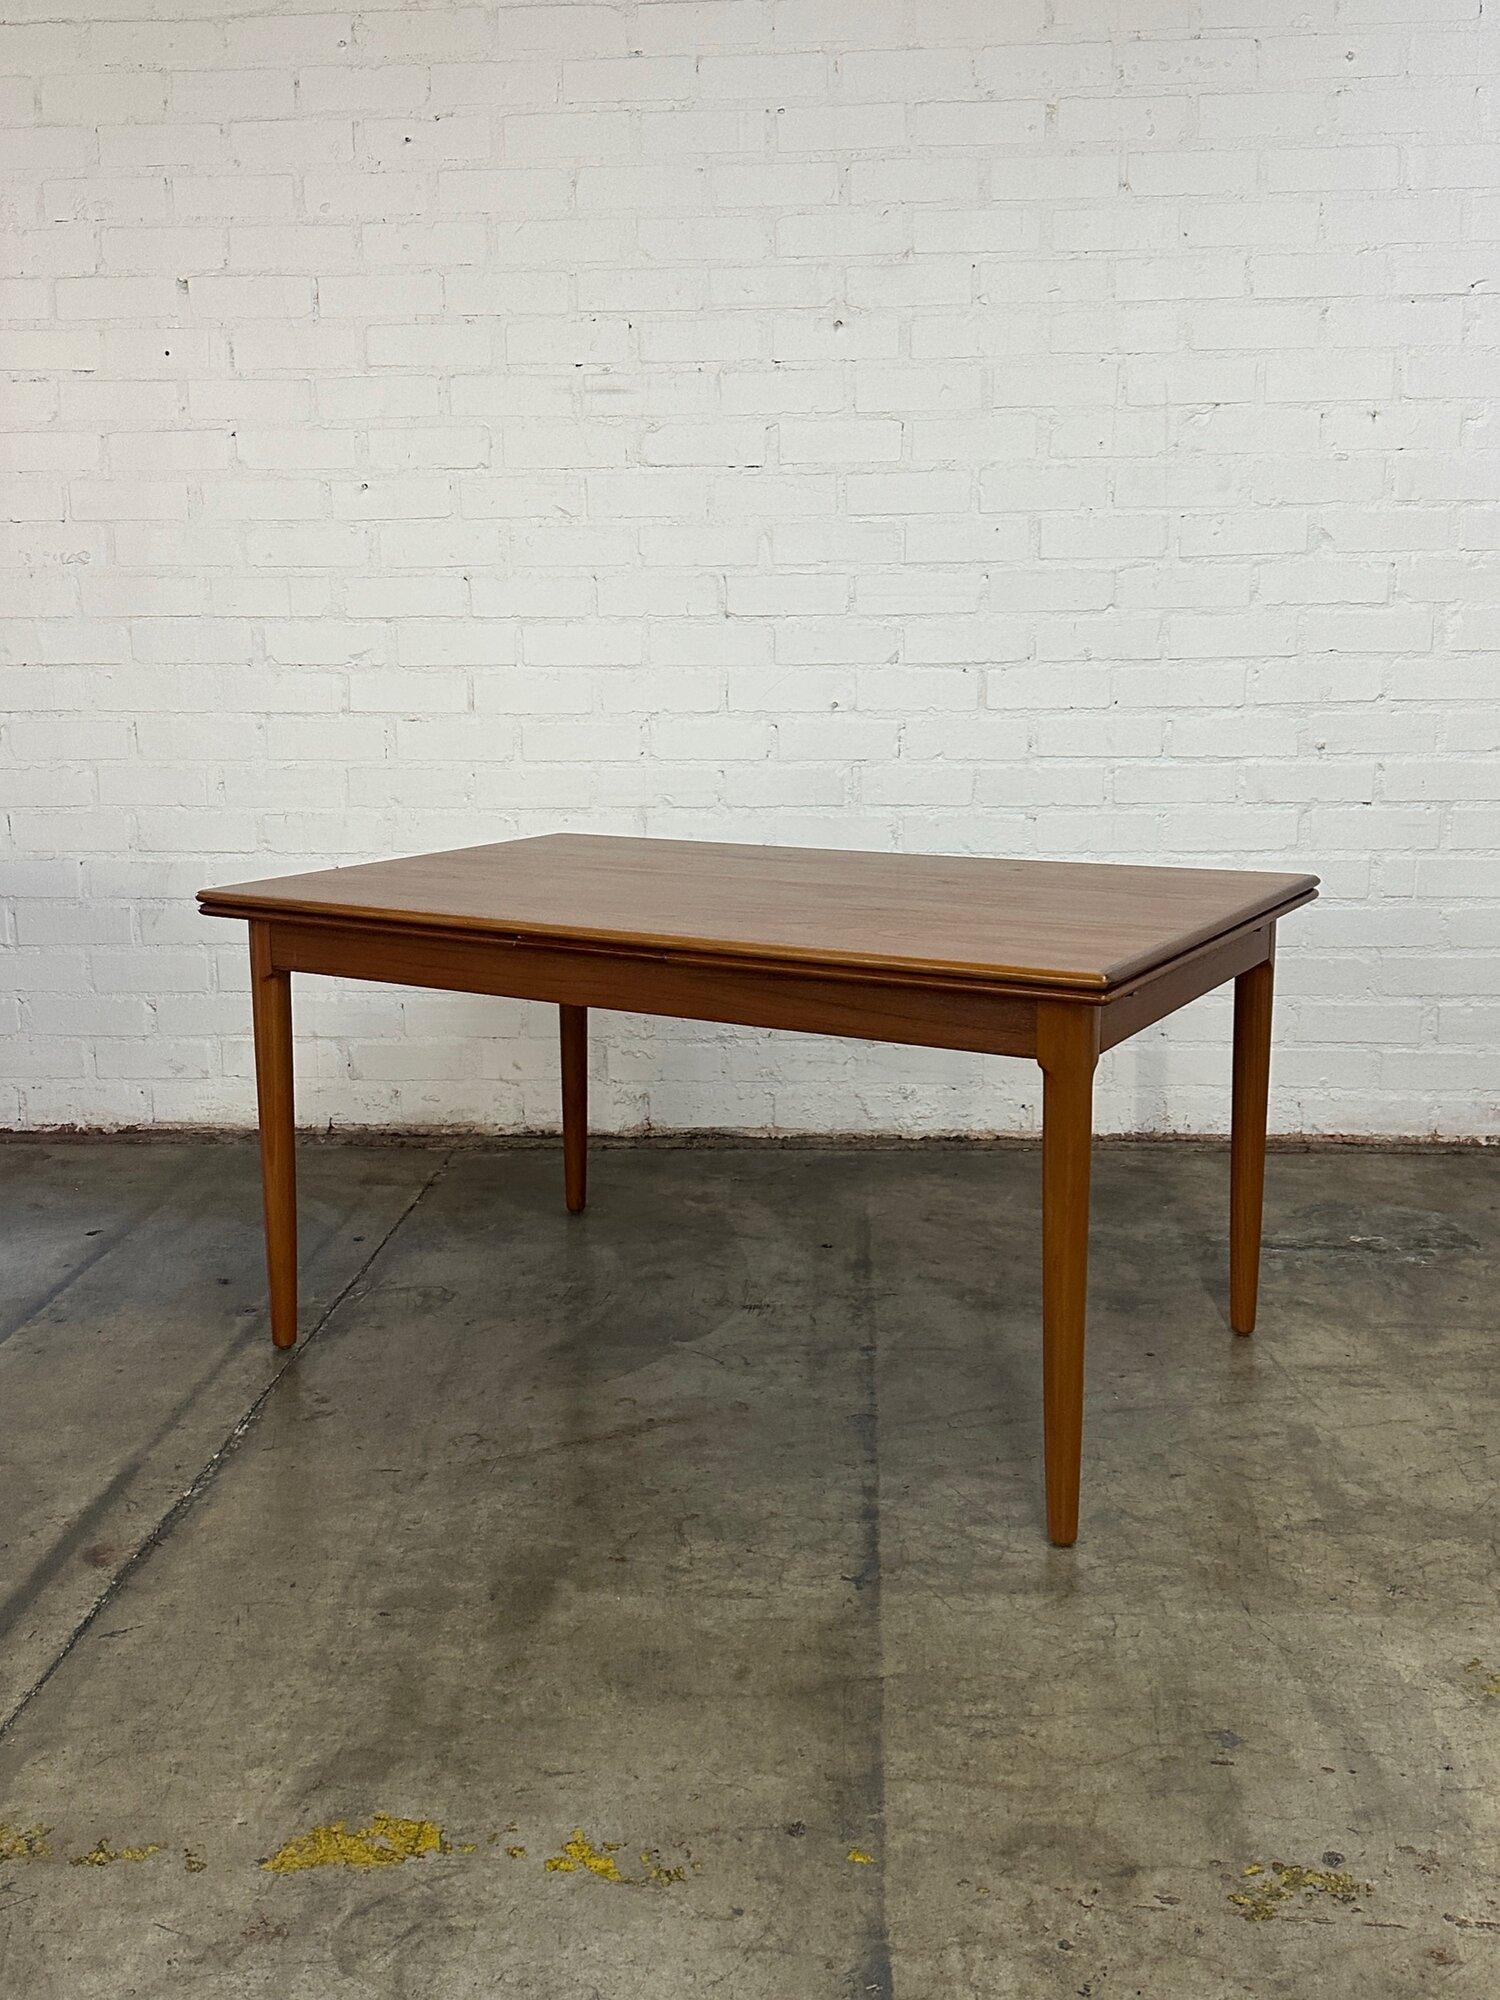 W105 W57 D38 H29 KC24

Minimal teak dining table with extensions that slide underneath surface. Table is strucutrually sound, sturdy and fully functional. Item has been fully restored and shows very well with no major areas of wear visible. 

